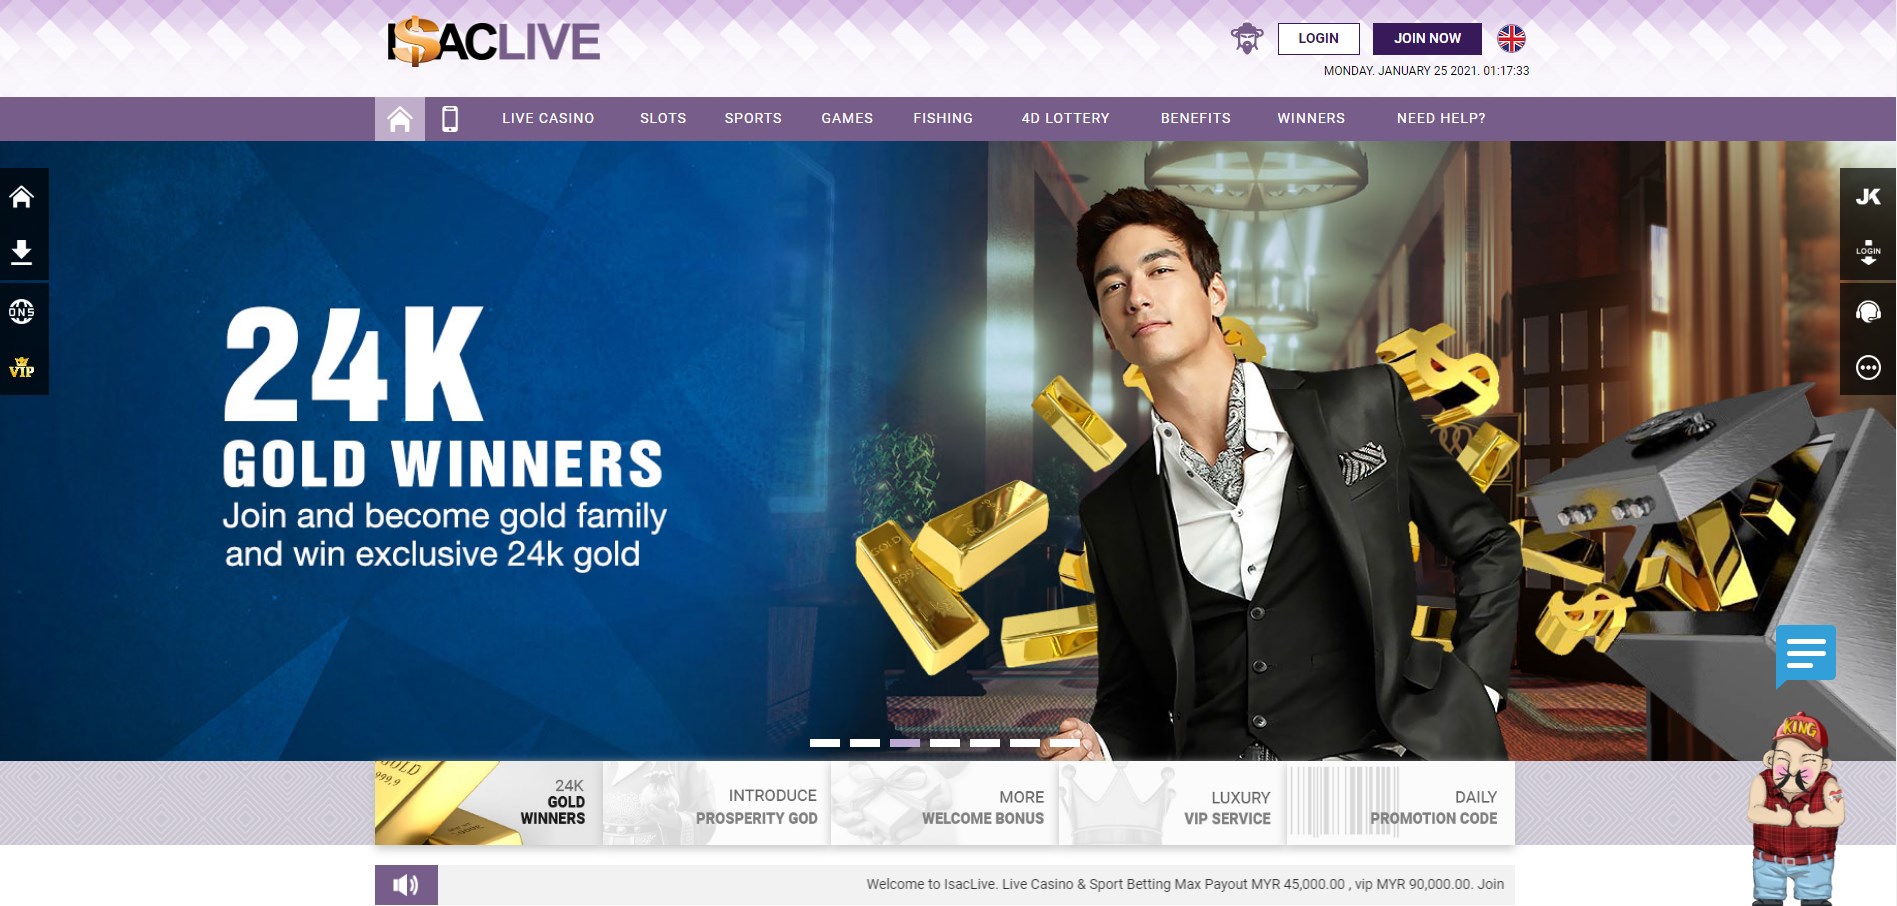 Isac Live Casino Review